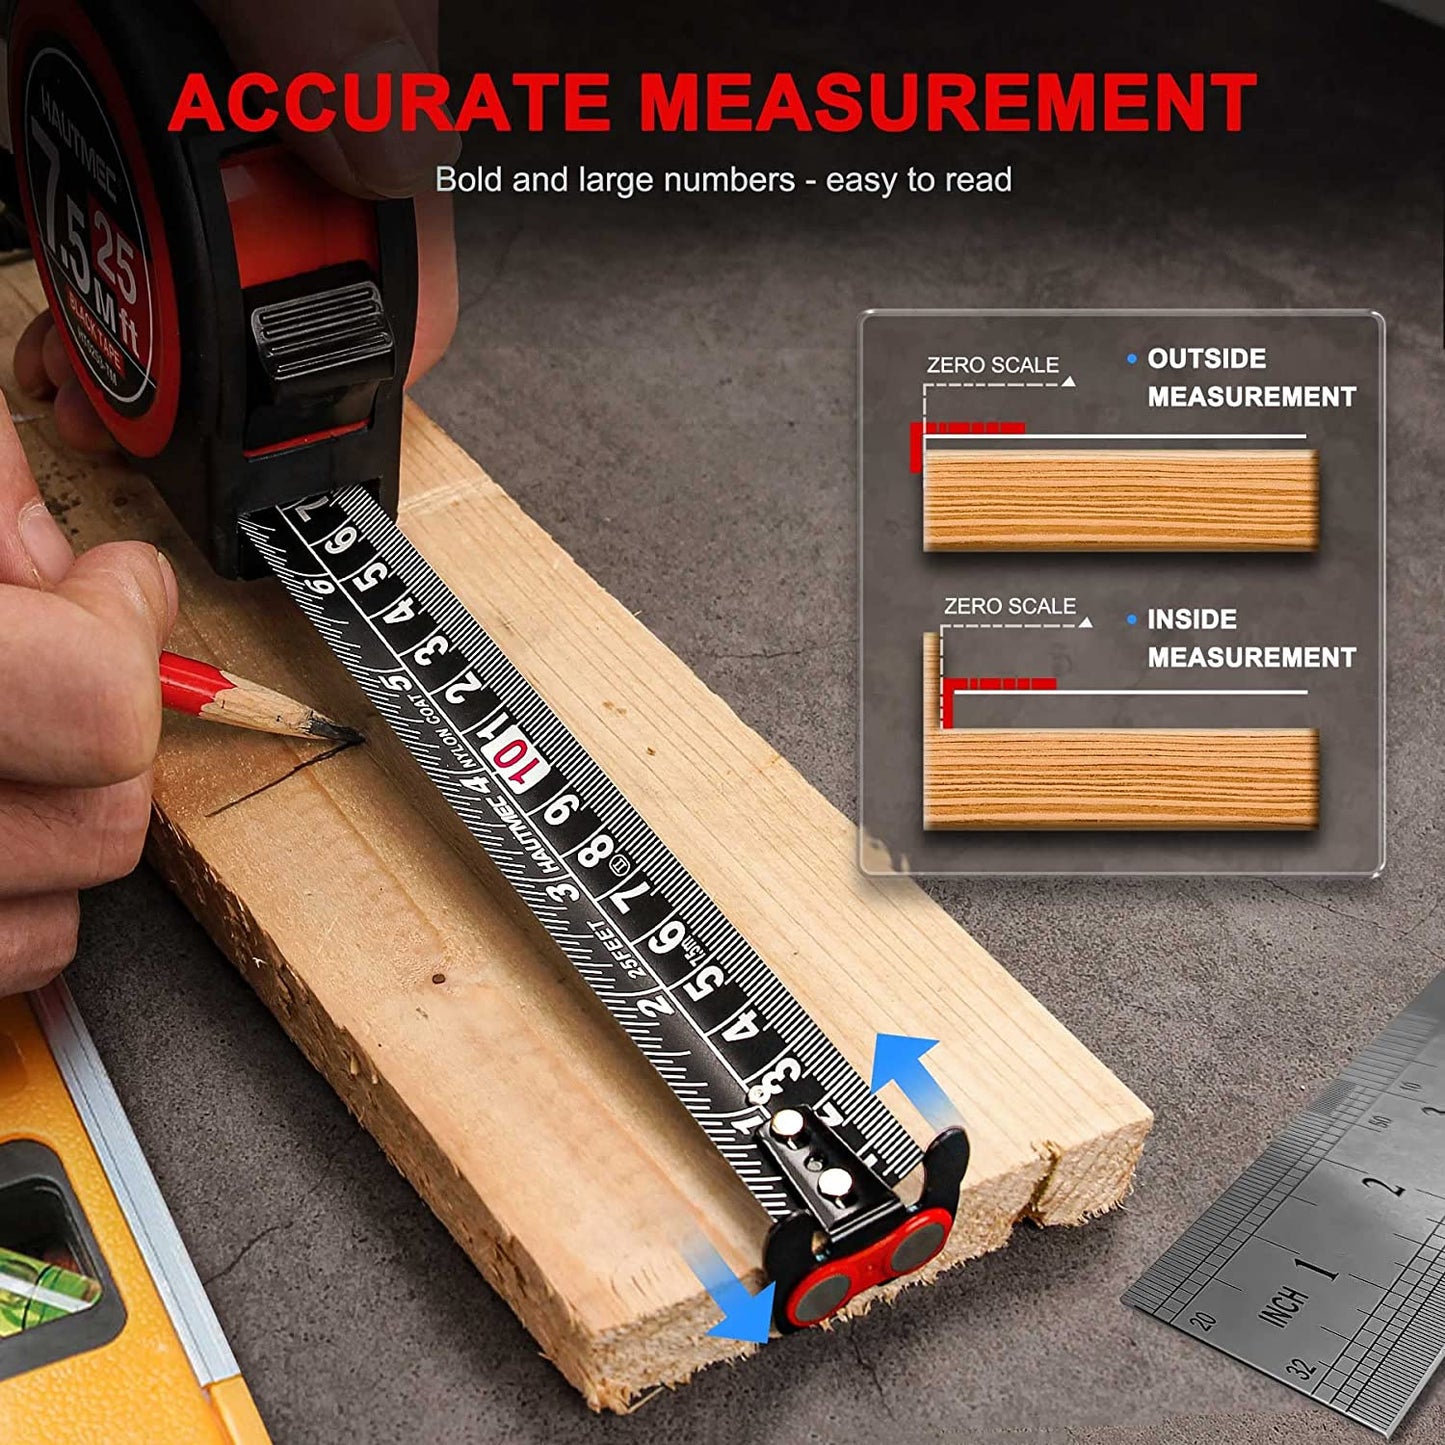 HAUTMEC Measuring Tape 25Ft-Double Side Metric and Inches Black Tape, Retractable Tape Measure with Double Stop Buttons,Magnetic Hook and Compact Case for Construction, Carpenter, Architect HT0253-TM